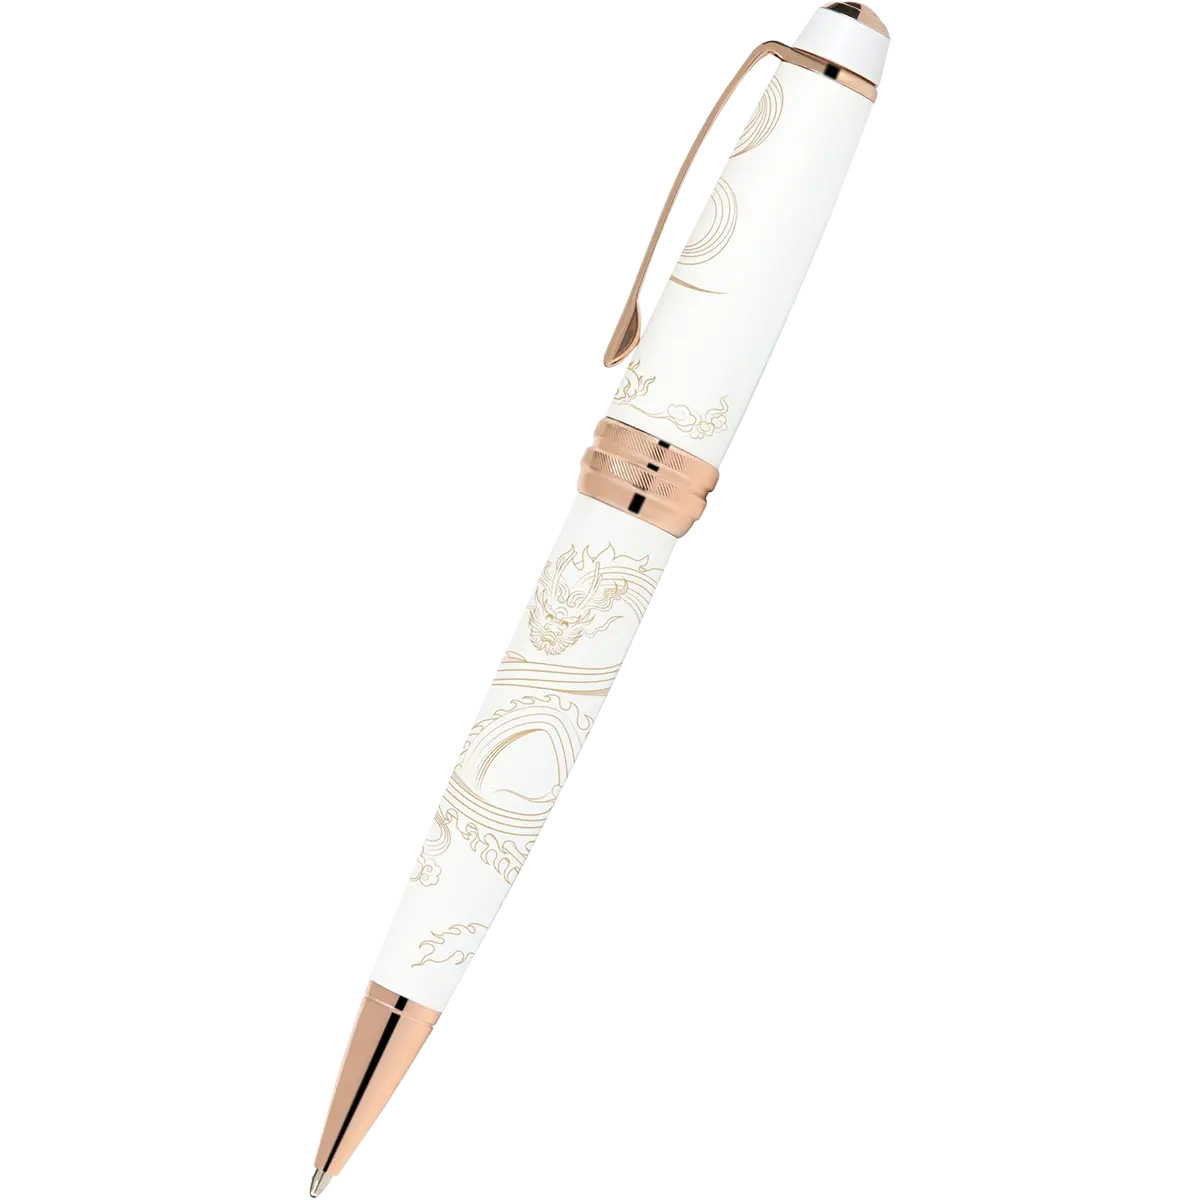 Cross Bailey - Year of the Dragon Pearlescent White Lacquer - Ballpoint Pen - Rose Gold Cross Pens